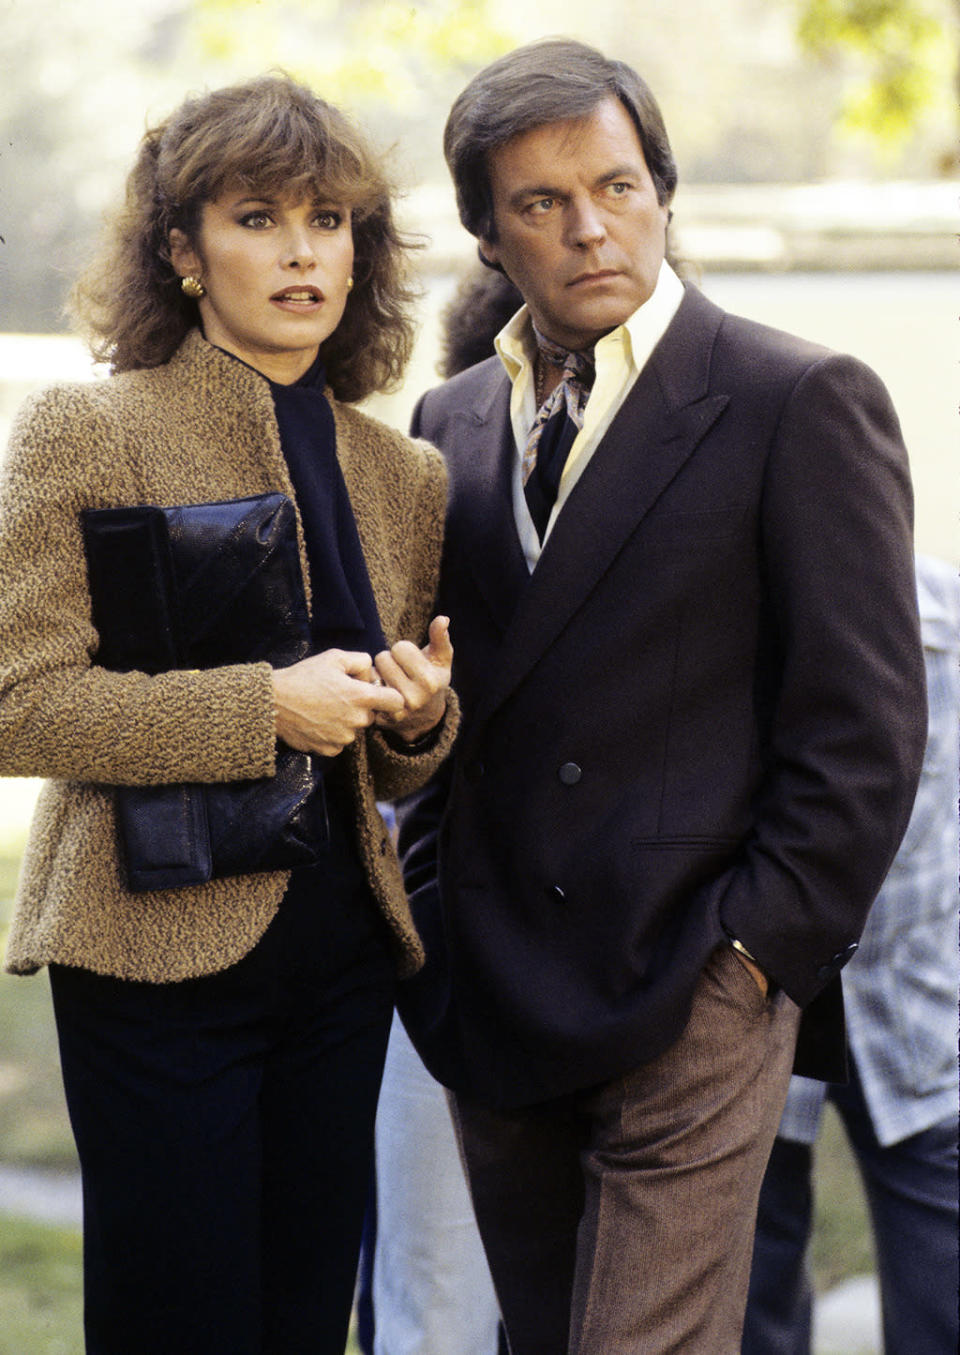 <p>This mystery series starred Robert Wagner and Stefanie Powers as Jonathan and Jennifer Hart, married jetsetters who dabbled in amateur crime solving. This popular show was up against <i>Trapper John M.D.</i> for the PCA in 1980, and it went on to air for five seasons on ABC.</p><p><i>(Credit: Getty Images) </i></p>